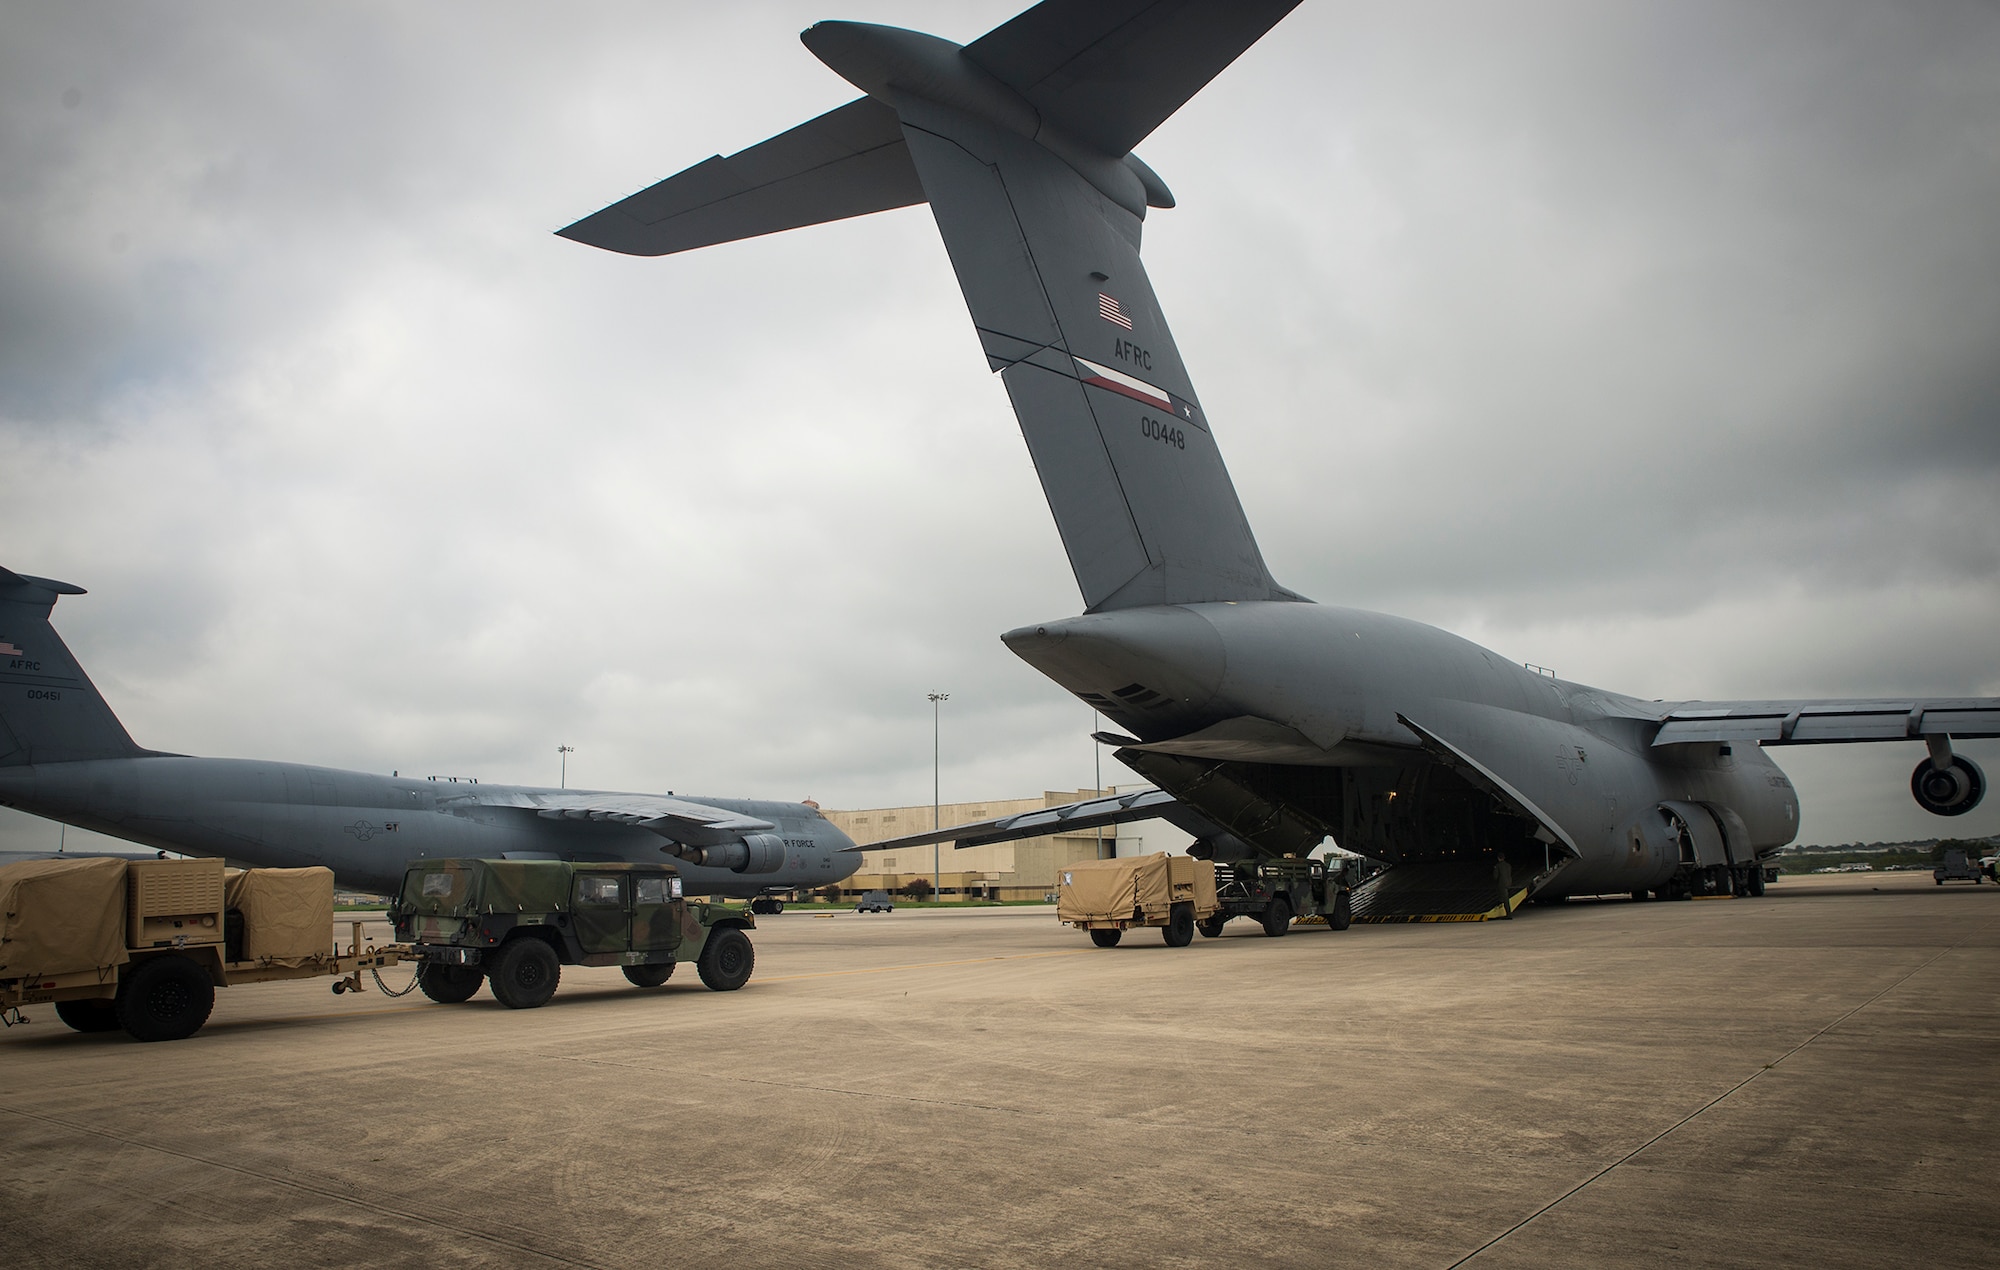 Loadmasters from the 68th Airlift Squadron load Humvees along with other equipment onto an awaiting C-5A Galaxy aircraft Sept. 8, 2016 at Joint Base San Antonio-Lackland, Texas. Soldiers from U.S. Army South’s Headquarters and Headquarters Battalion Soliders from JBSA-Fort Sam-Houston are taking part in a weeklong emergency deployment exercise at Naval Station Guantanamo Bay, Cuba. (U.S. Air Force photo by Benjamin Faske)